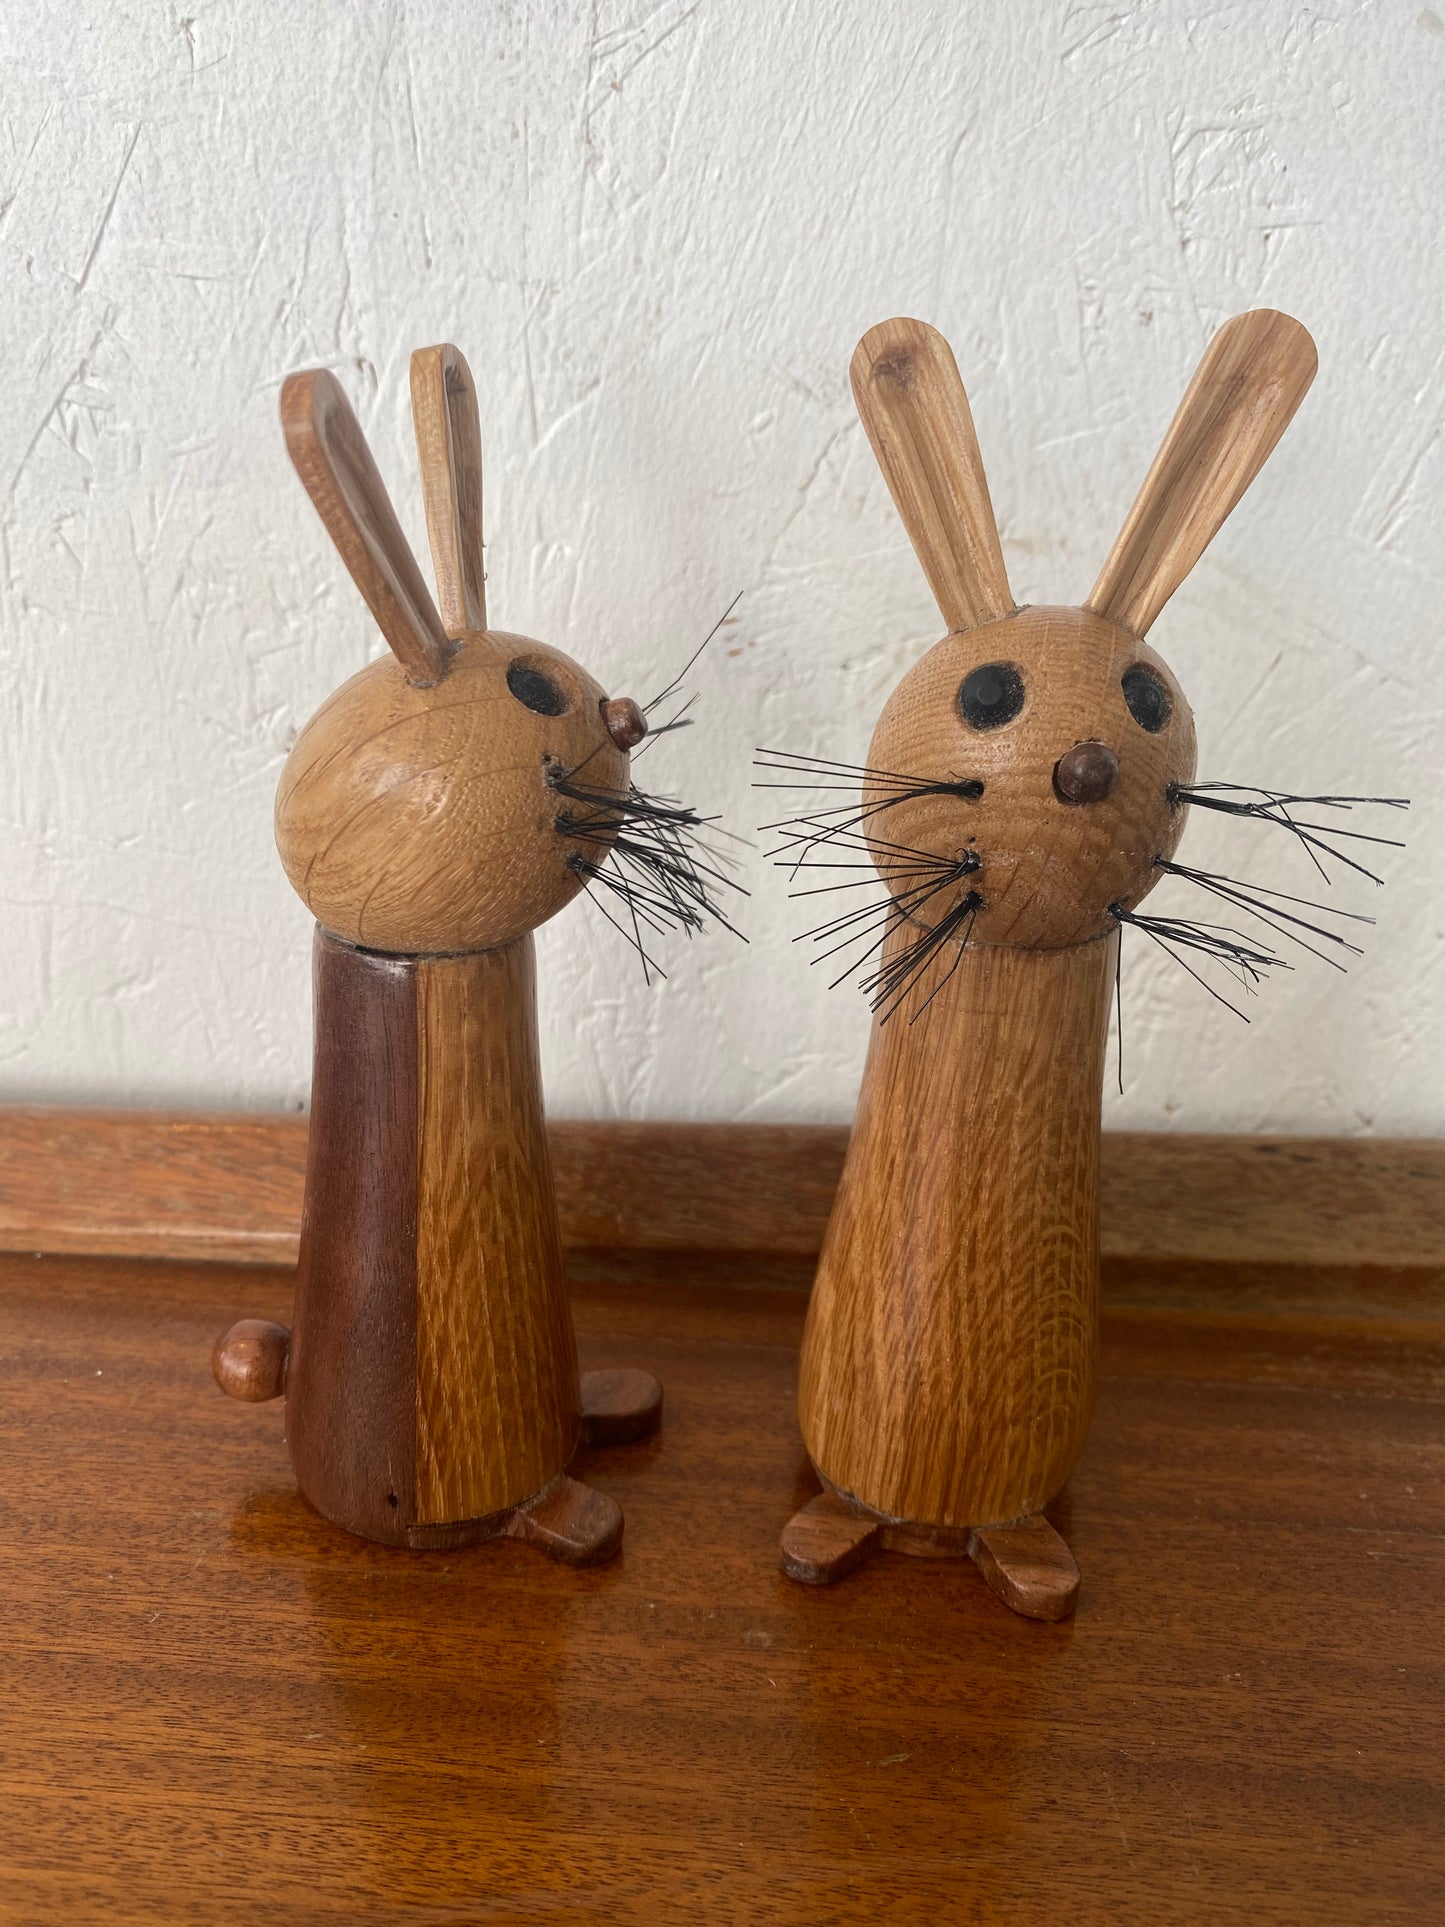 Handmade rabbits, by Geoff Meanwell